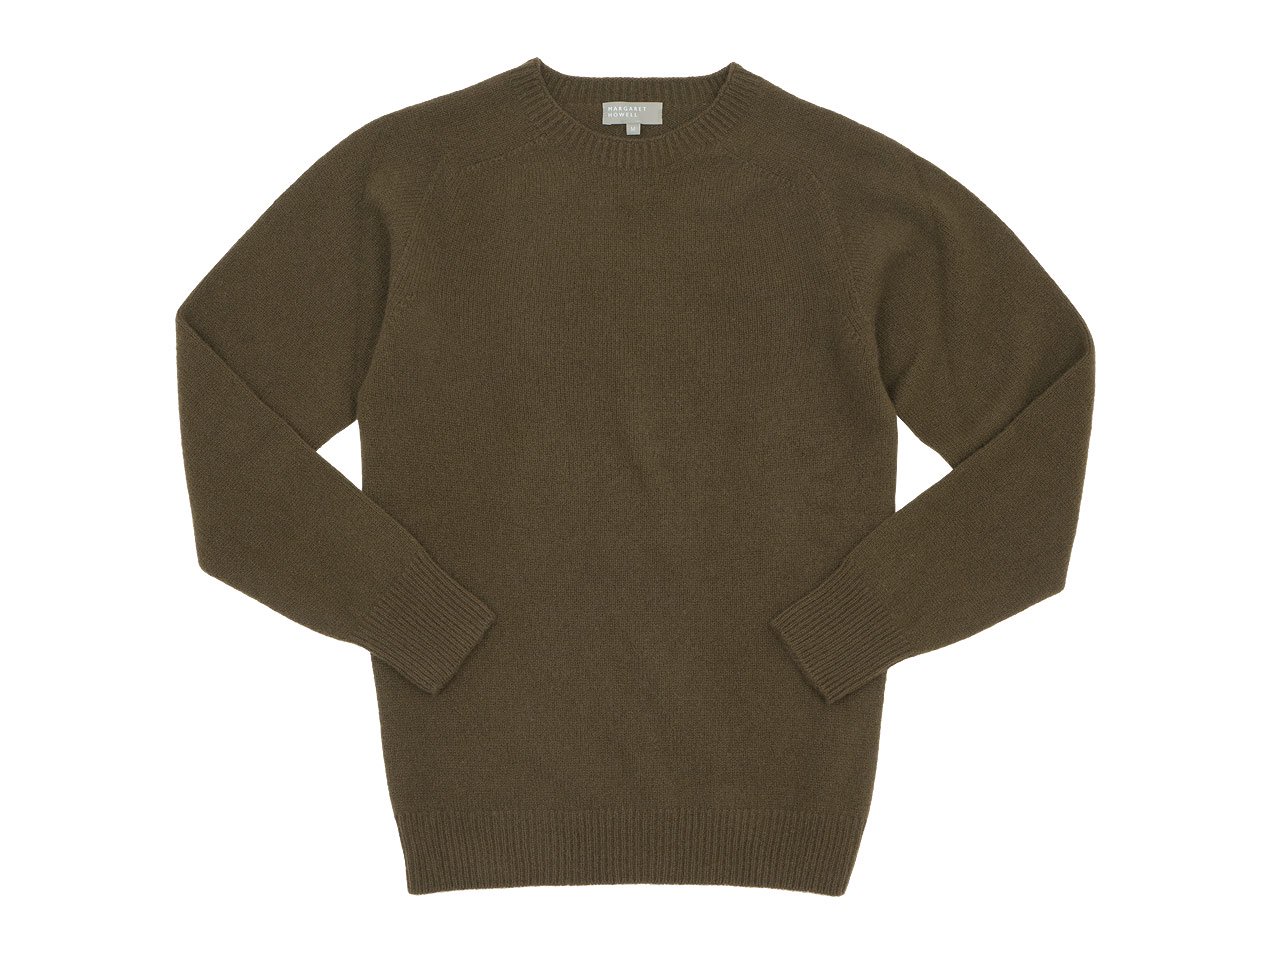 MARGARET HOWELL MERINO CASHMERE CREW KNIT 171OLIVE BROWN 〔メンズ〕